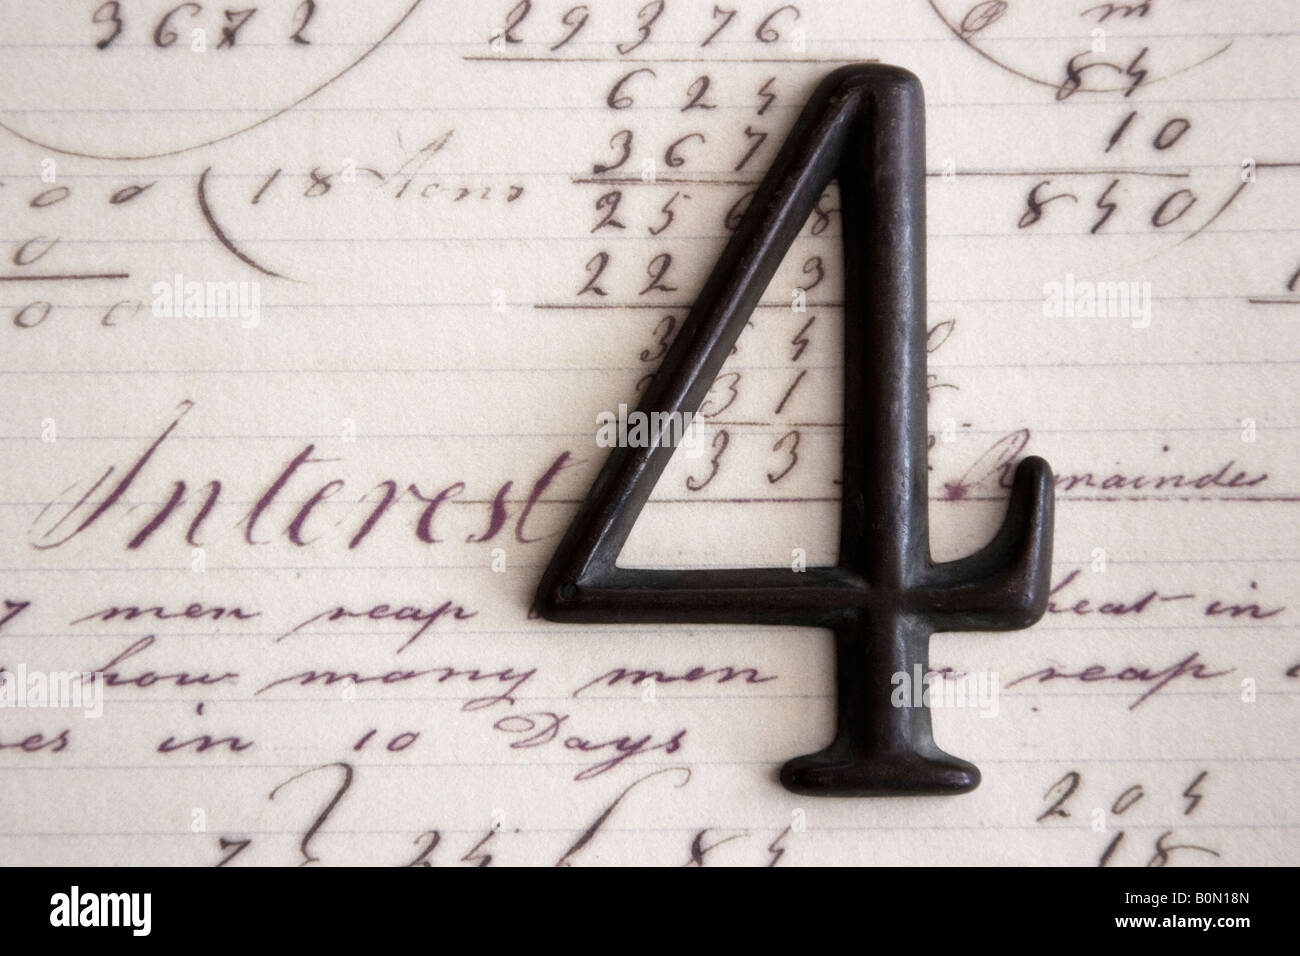 A dark metal number four pictured on paper containing other numbers and mathematical operations. Stock Photo